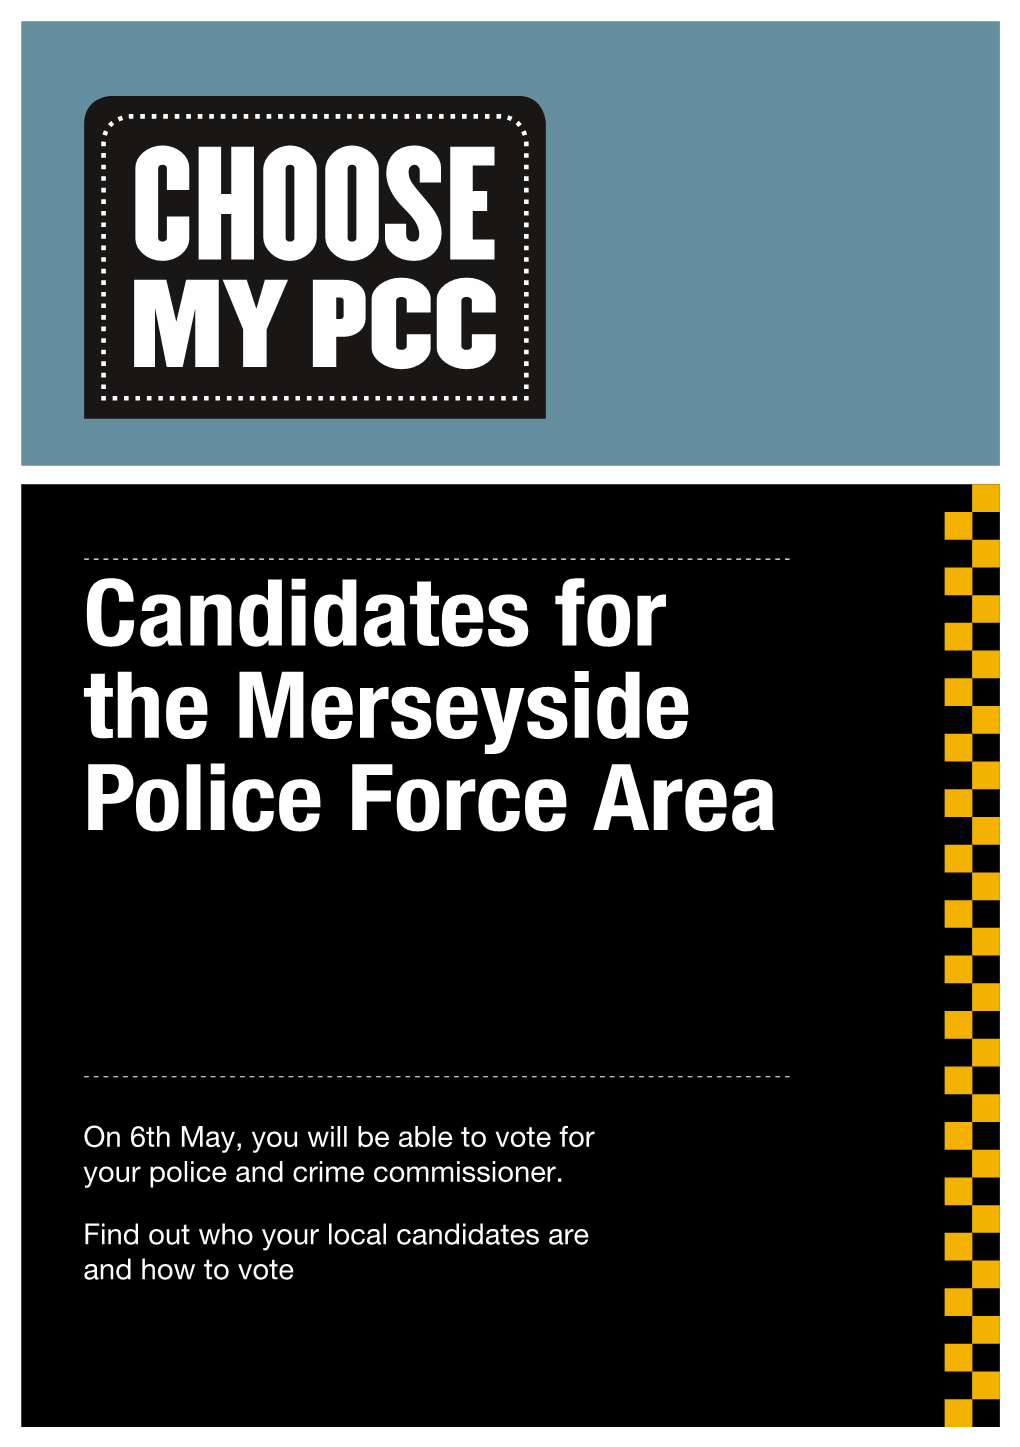 Candidates for the Merseyside Police Force Area